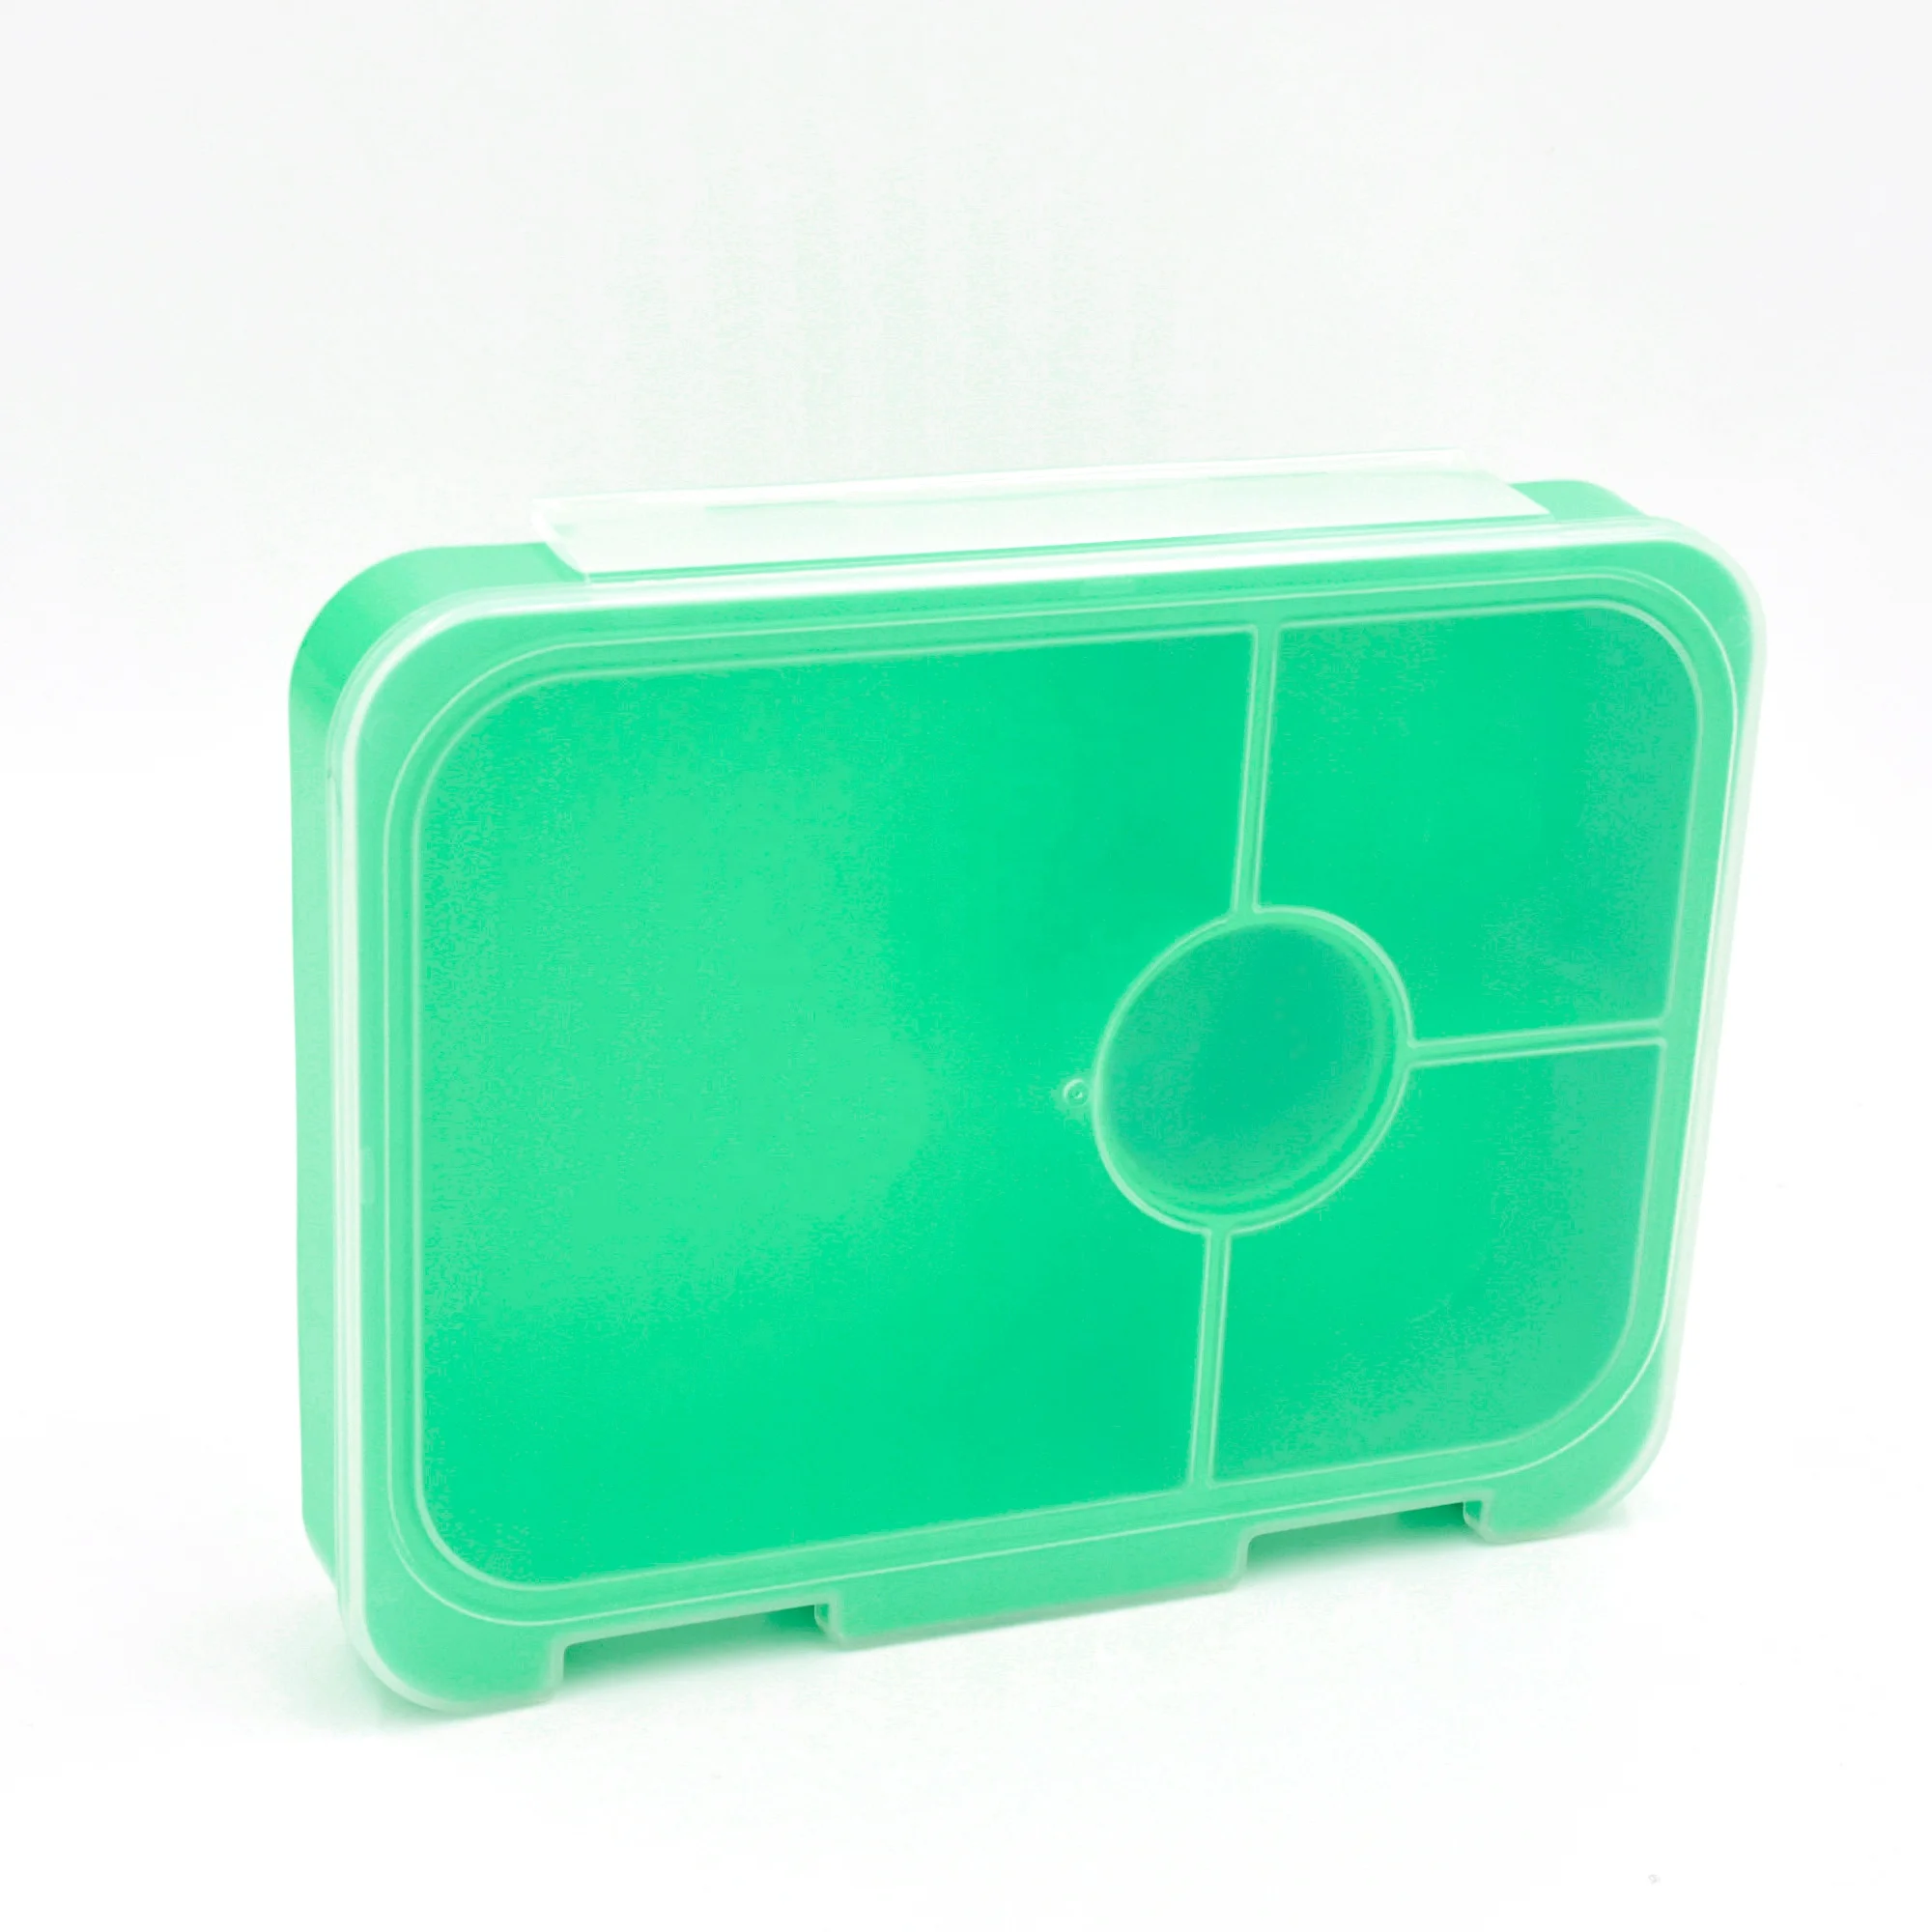 
Meal Prep Sealed Green Color Hot Box Lunch Box with Spoon Leak-proof 3 Compartments Storage Box 